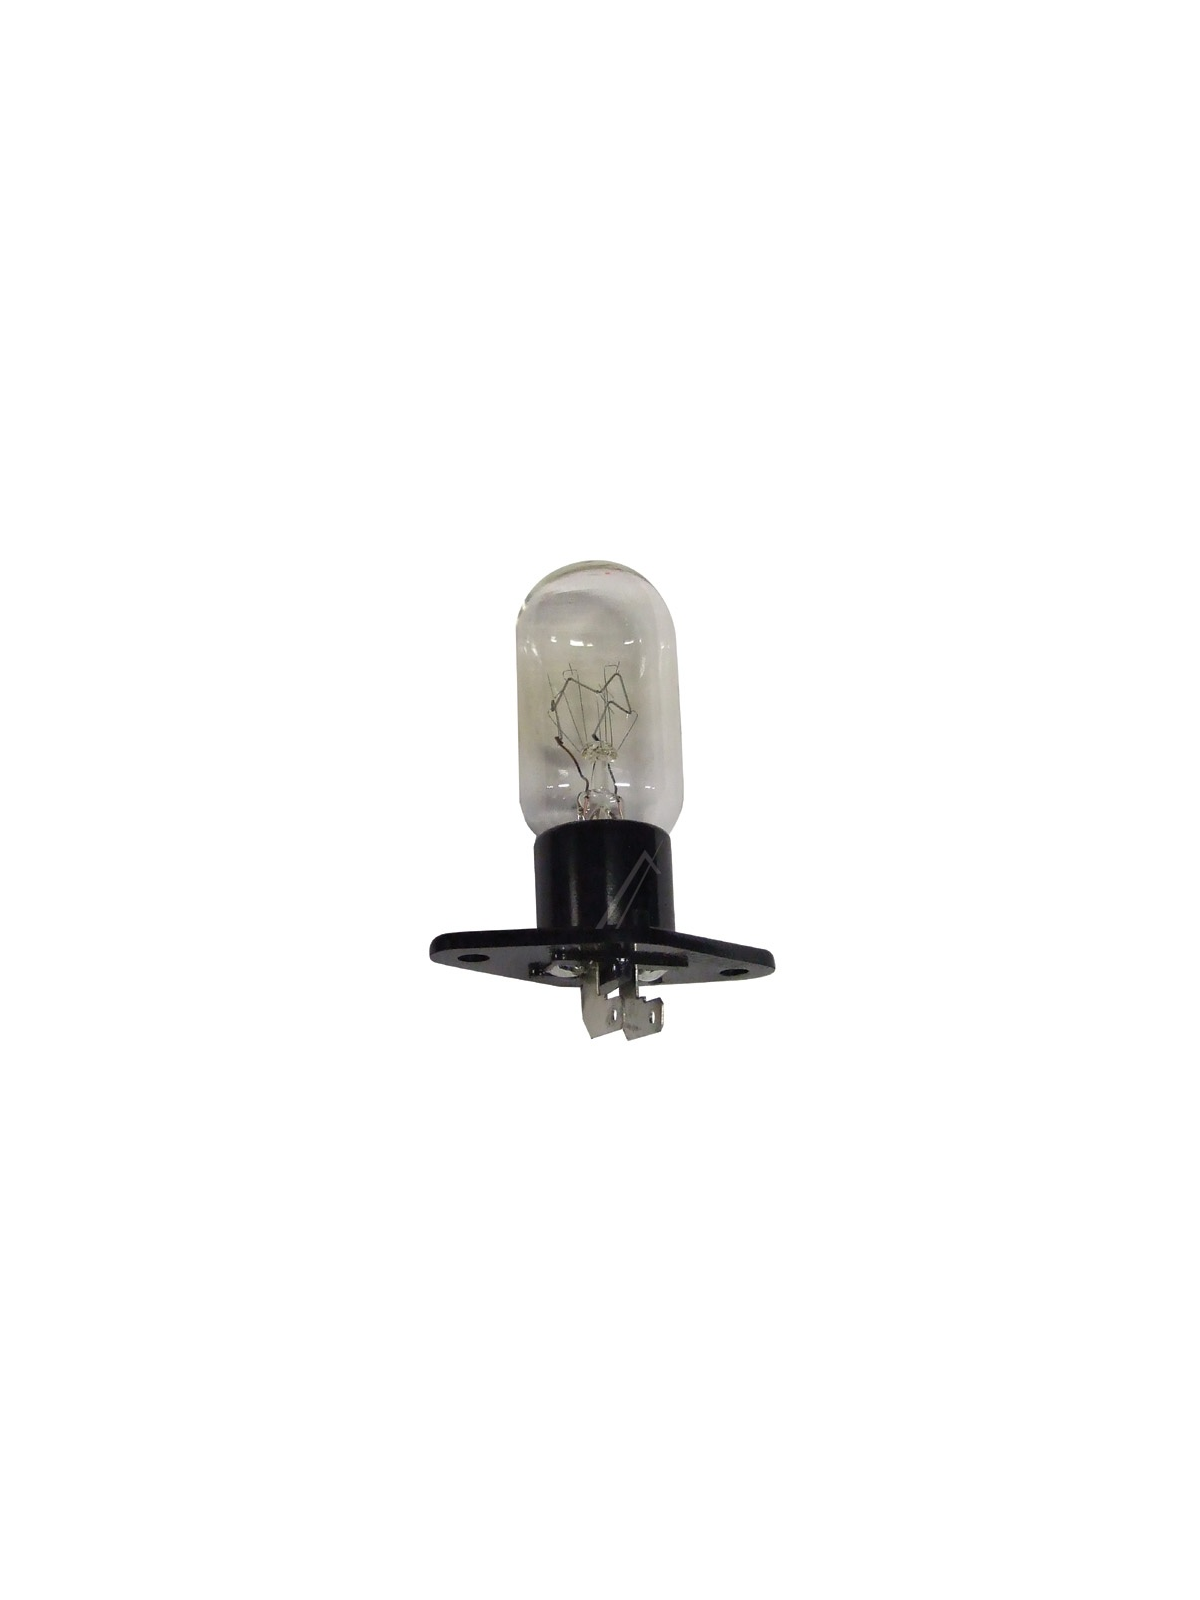 Lampe 25w LG MS304A / MH6320F - Micro-ondes